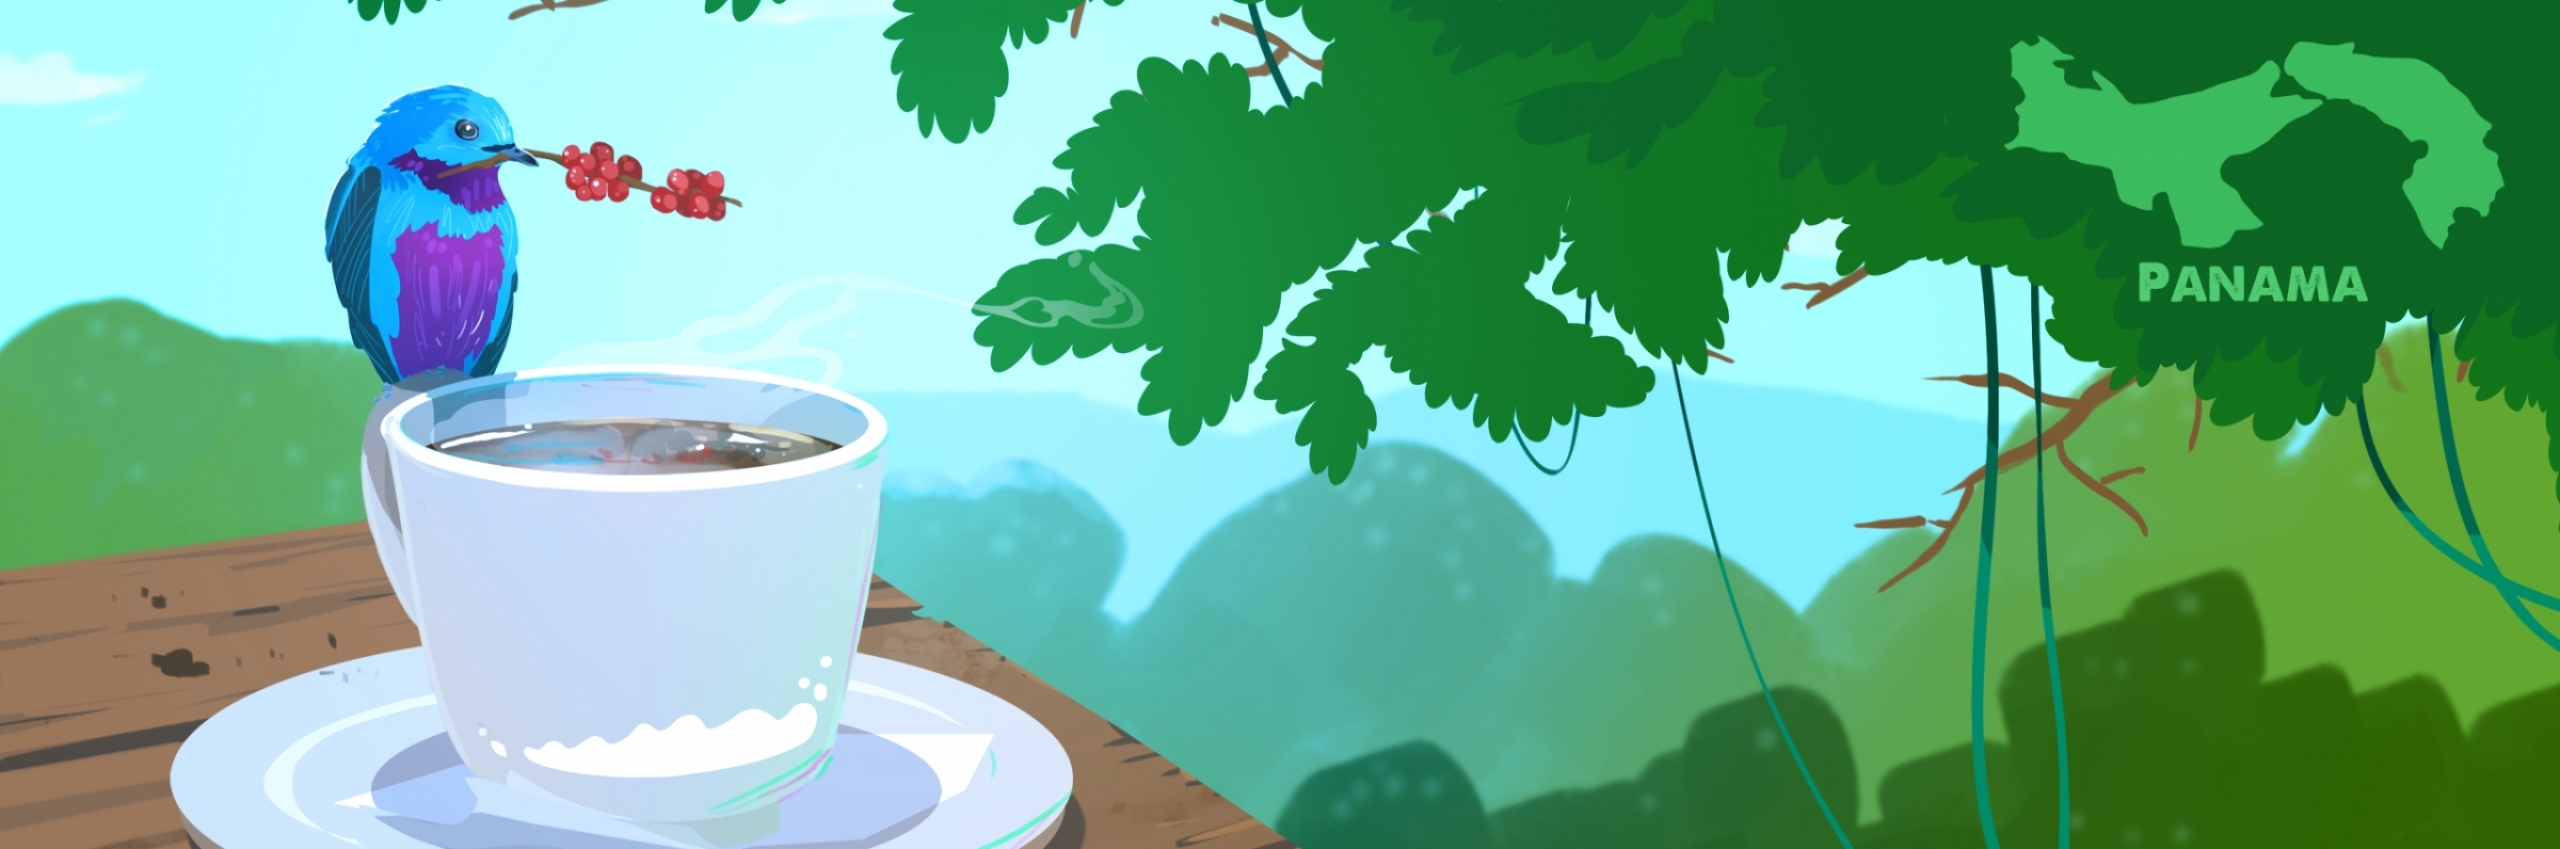 Illustration of a blue and purple bird sitting on the side of a white cup of coffee with jungle trees in background.